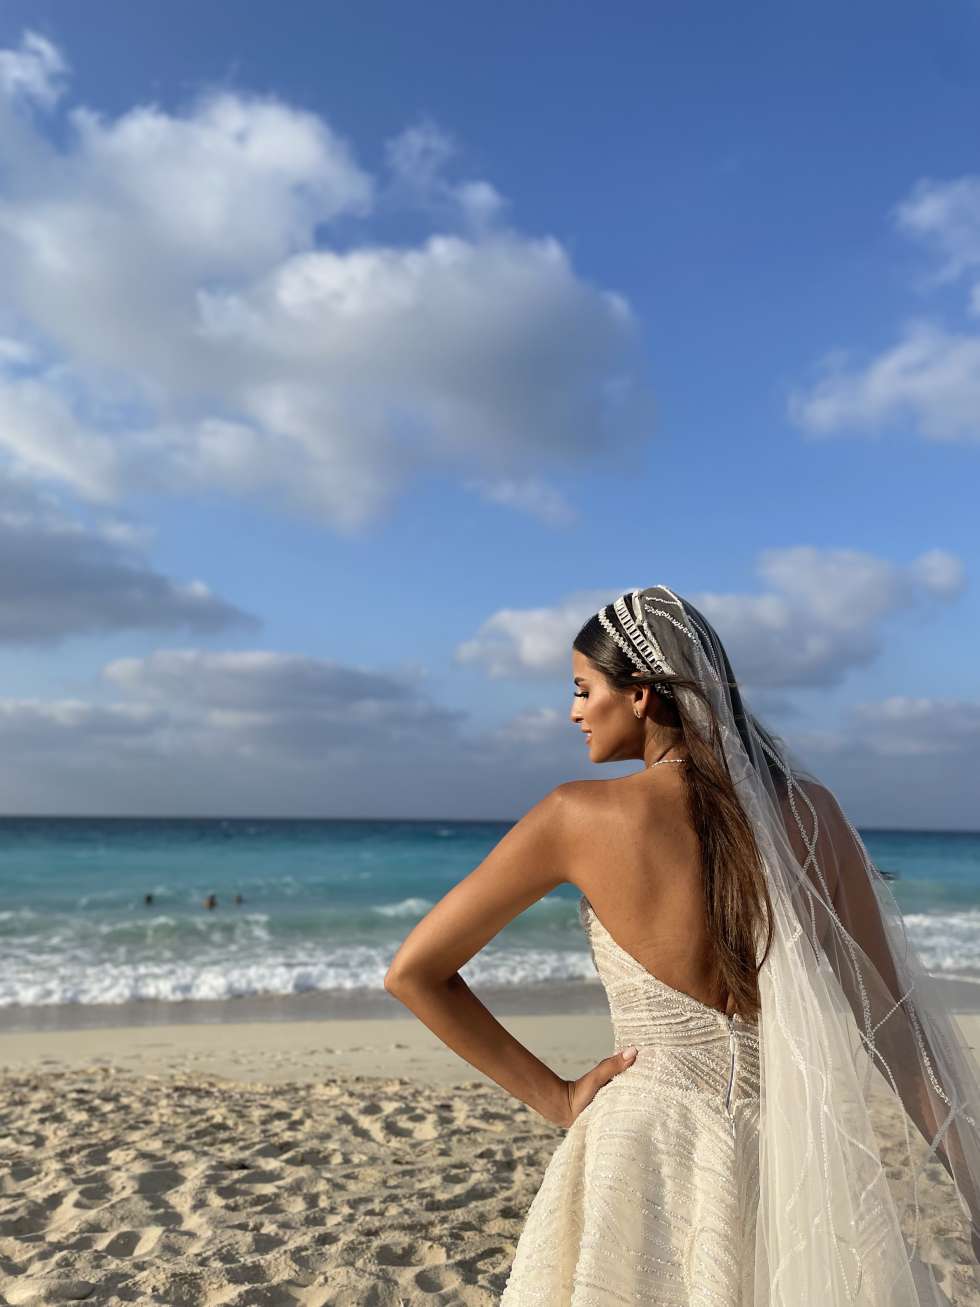 A Tropical Wedding at The North Coast in Egypt